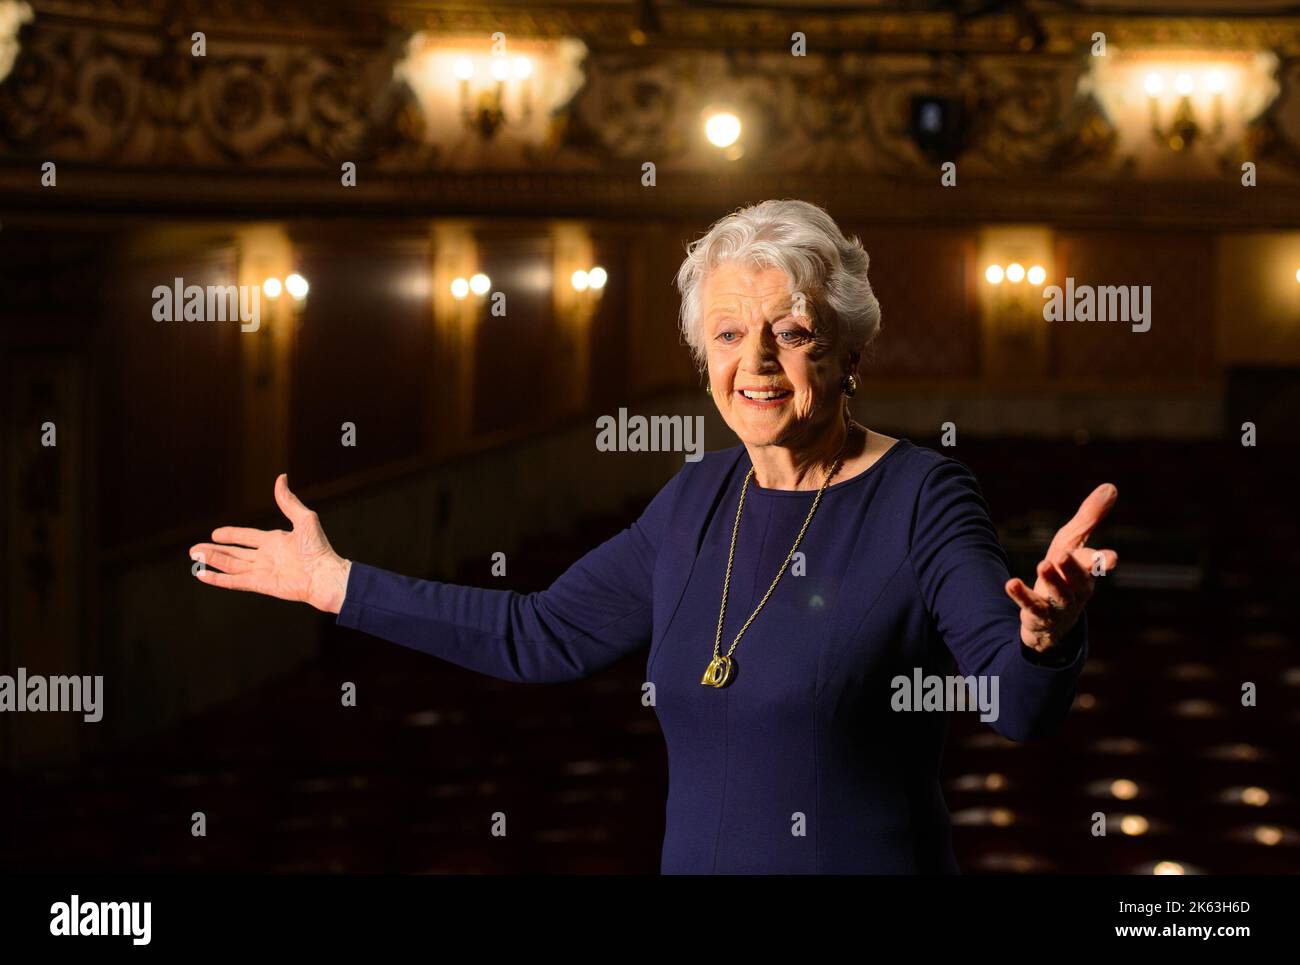 File photo dated 15/04/14 of Actress Dame Angela Lansbury onstage during a photo call at the Gielgud Theatre, in central London. Angela Lansbury has died at the age of 96 according to a family statement. Stock Photo